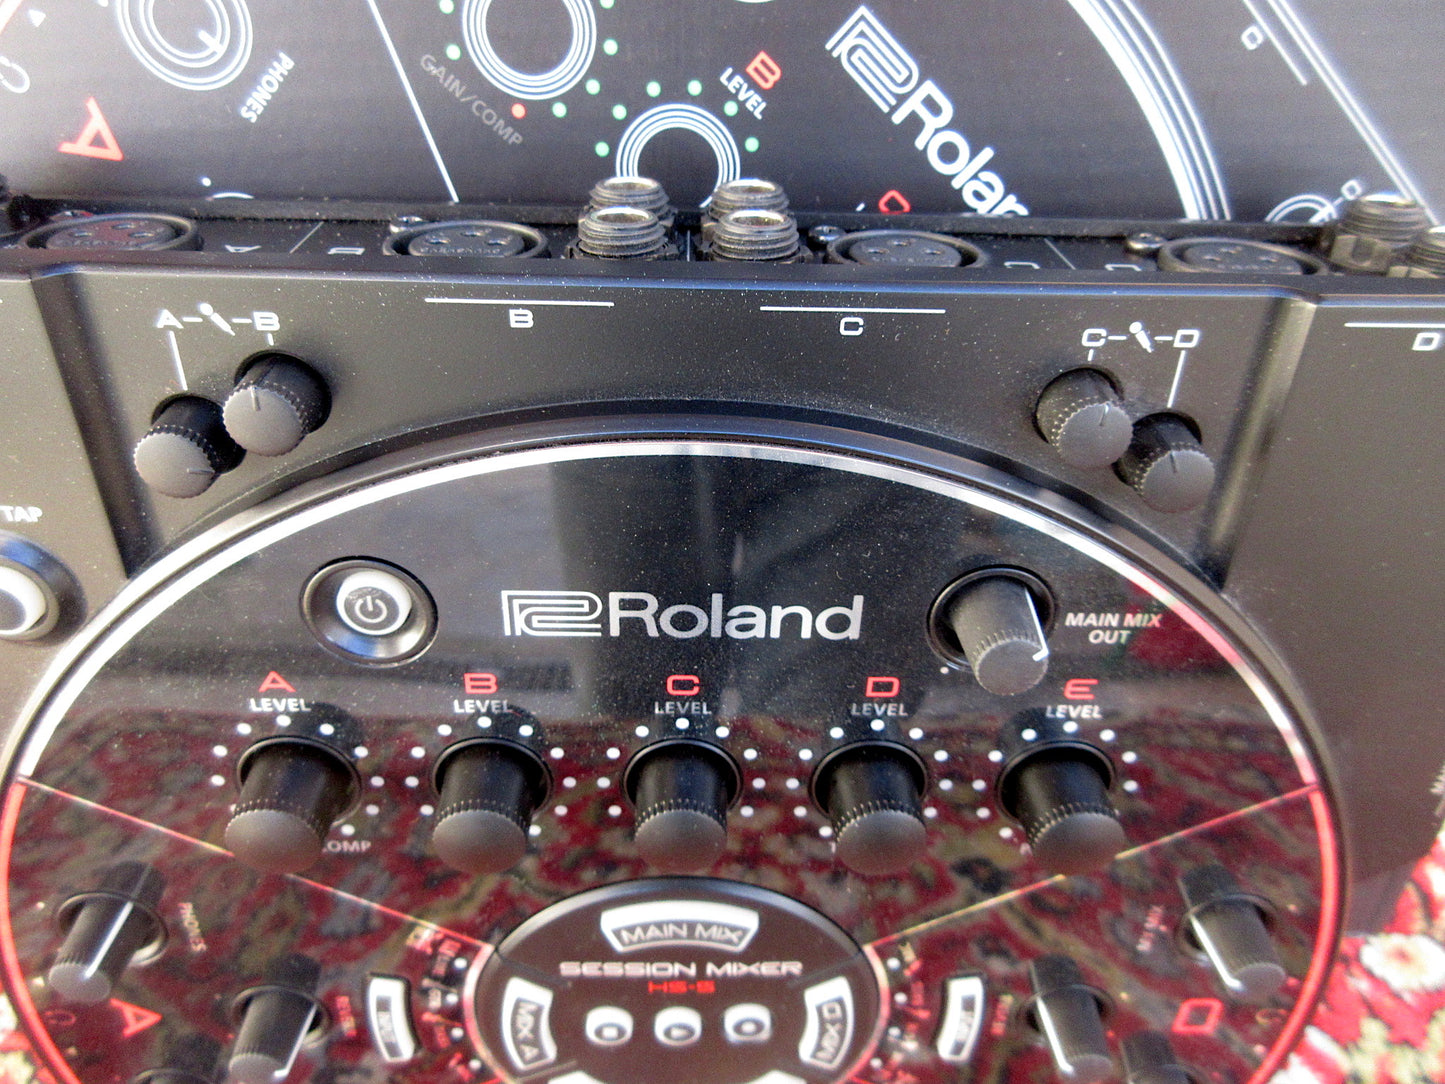 ROLAND HS-5 session mixer, used.